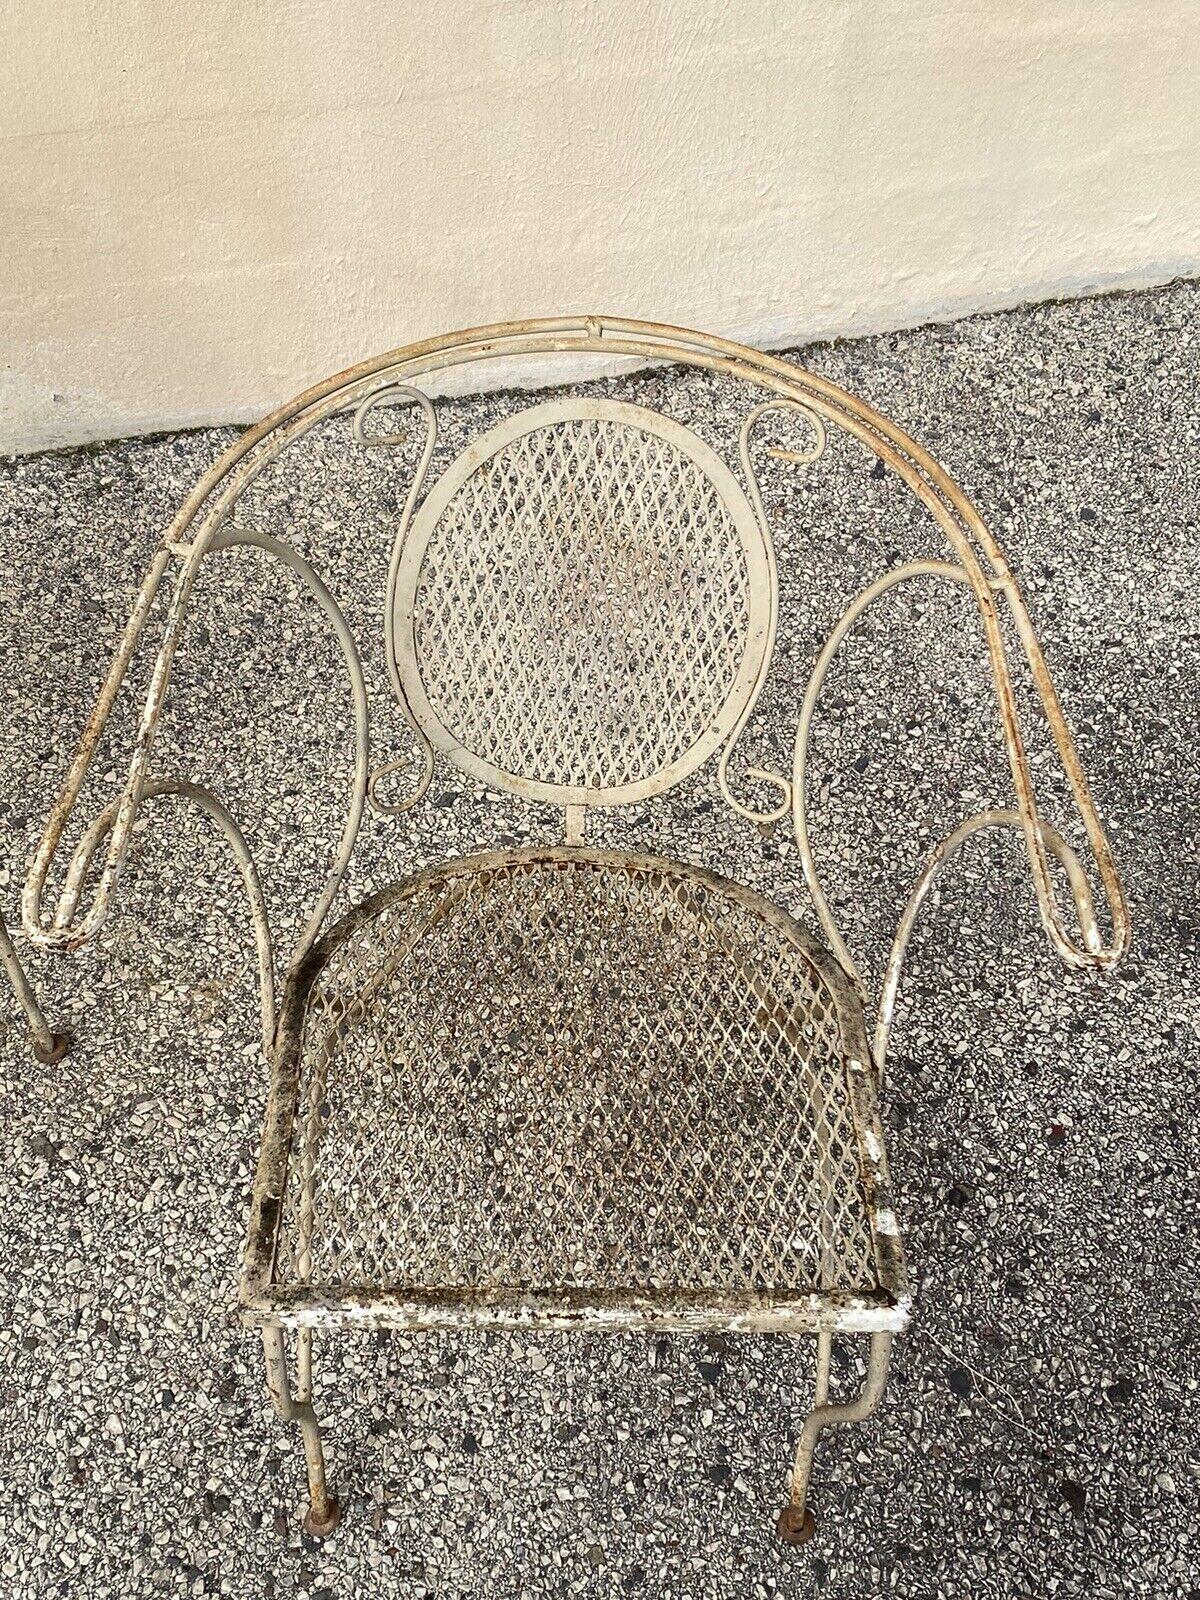 20th Century Vintage Mid Century Wrought Iron Barrel Back Garden Patio Dining Chairs - A Pair For Sale